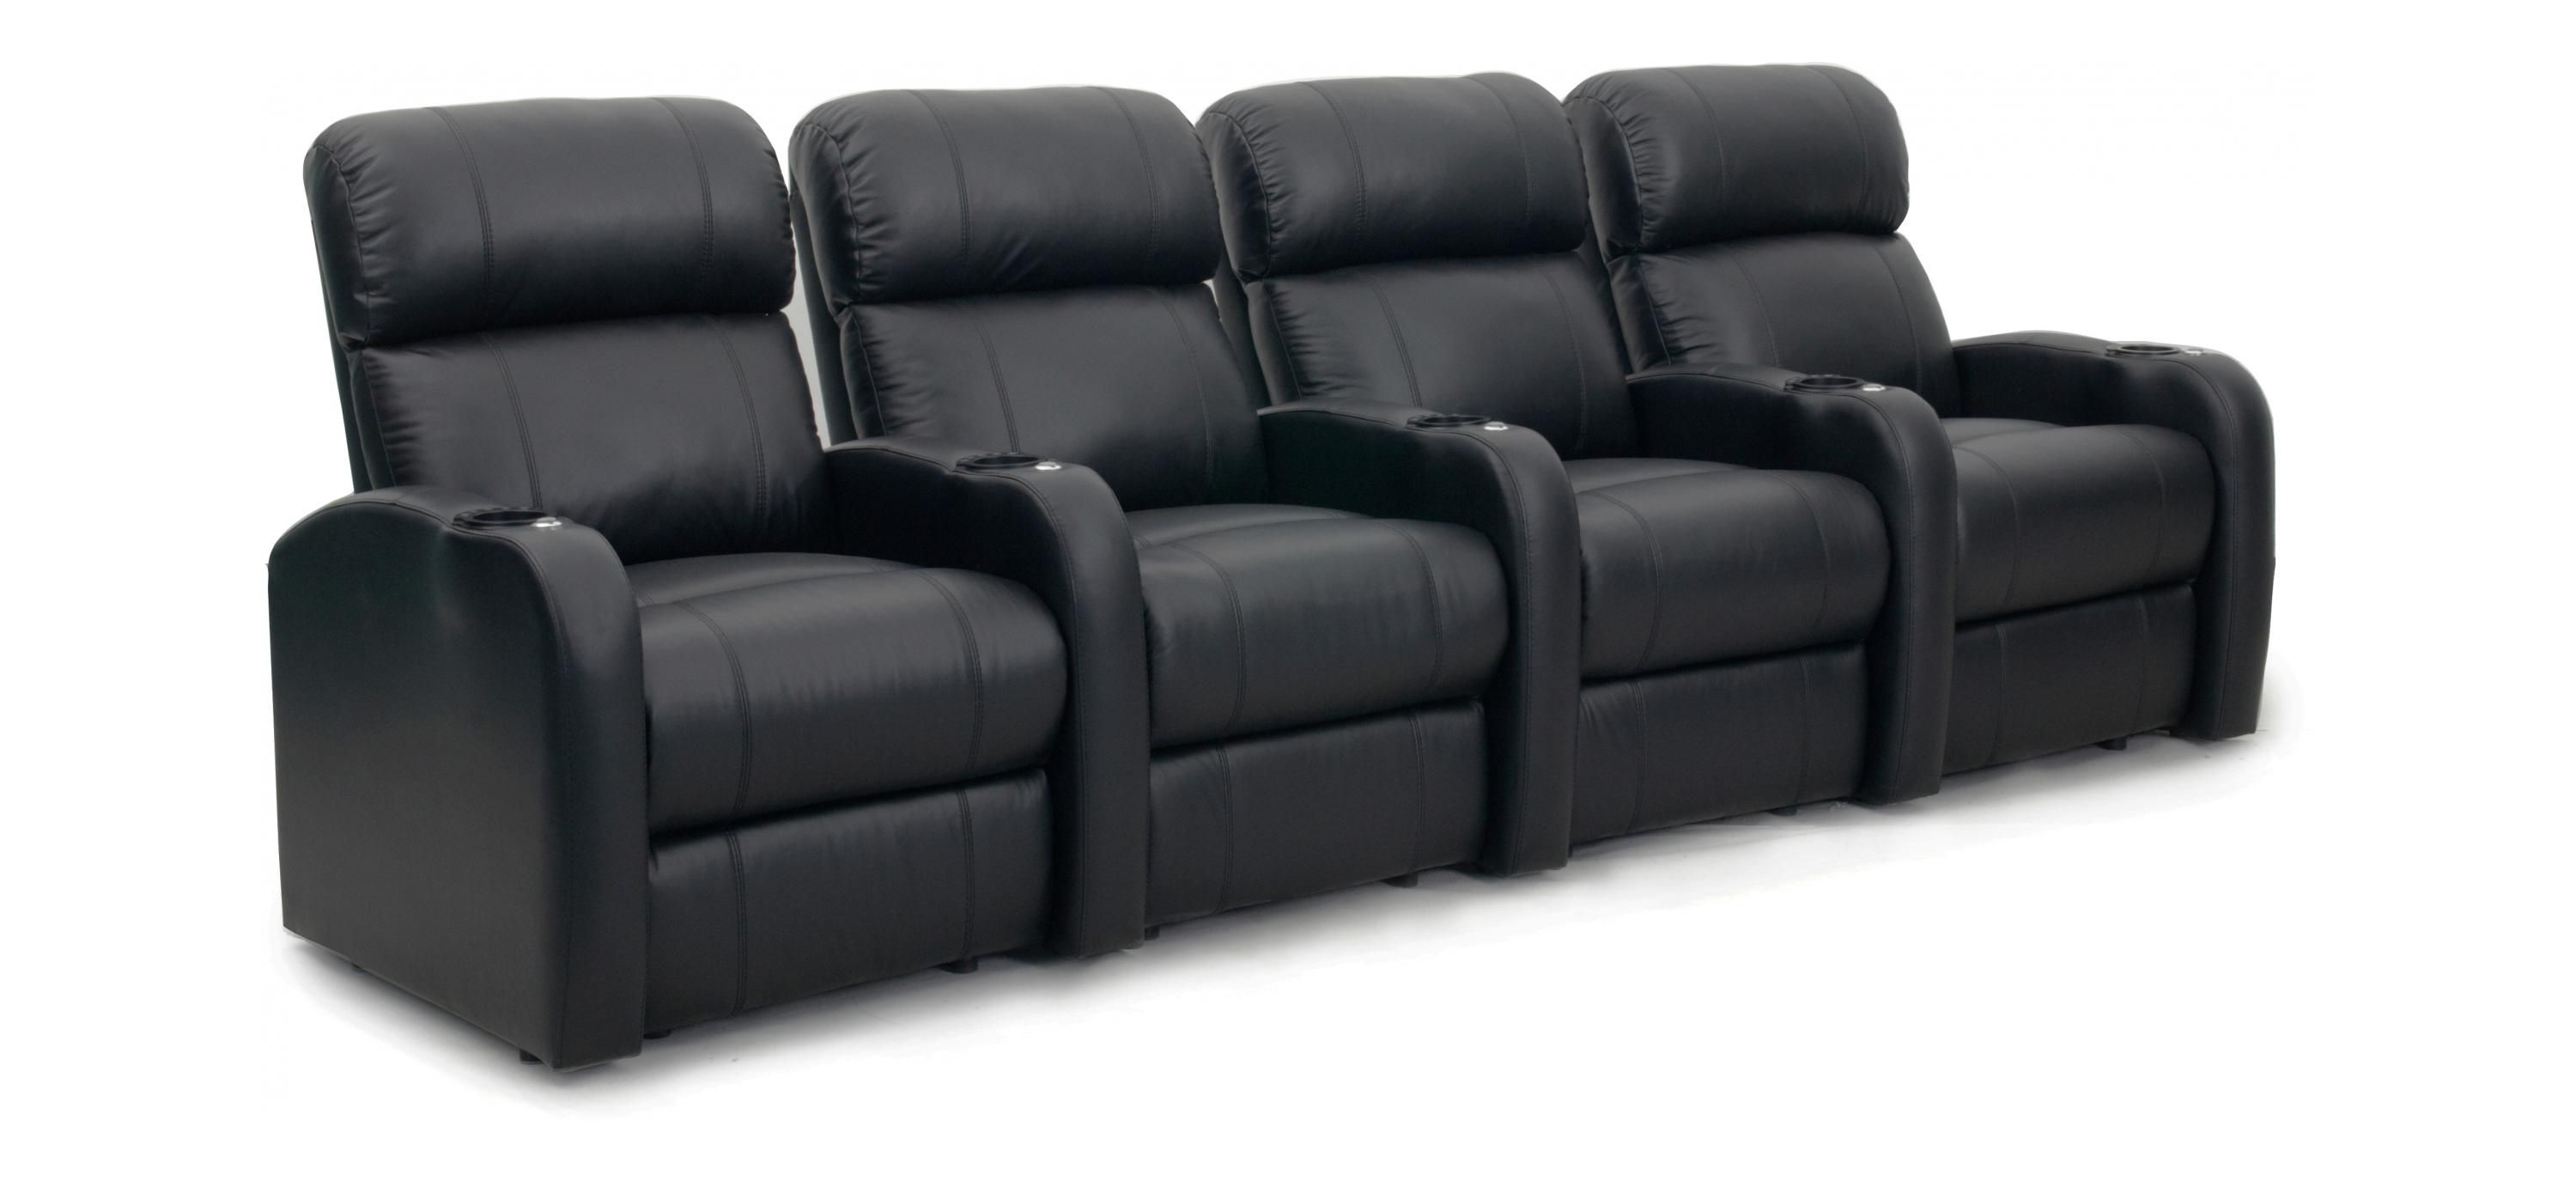 Galaxy 4-pc. Leather Reclining Sectional Sofa